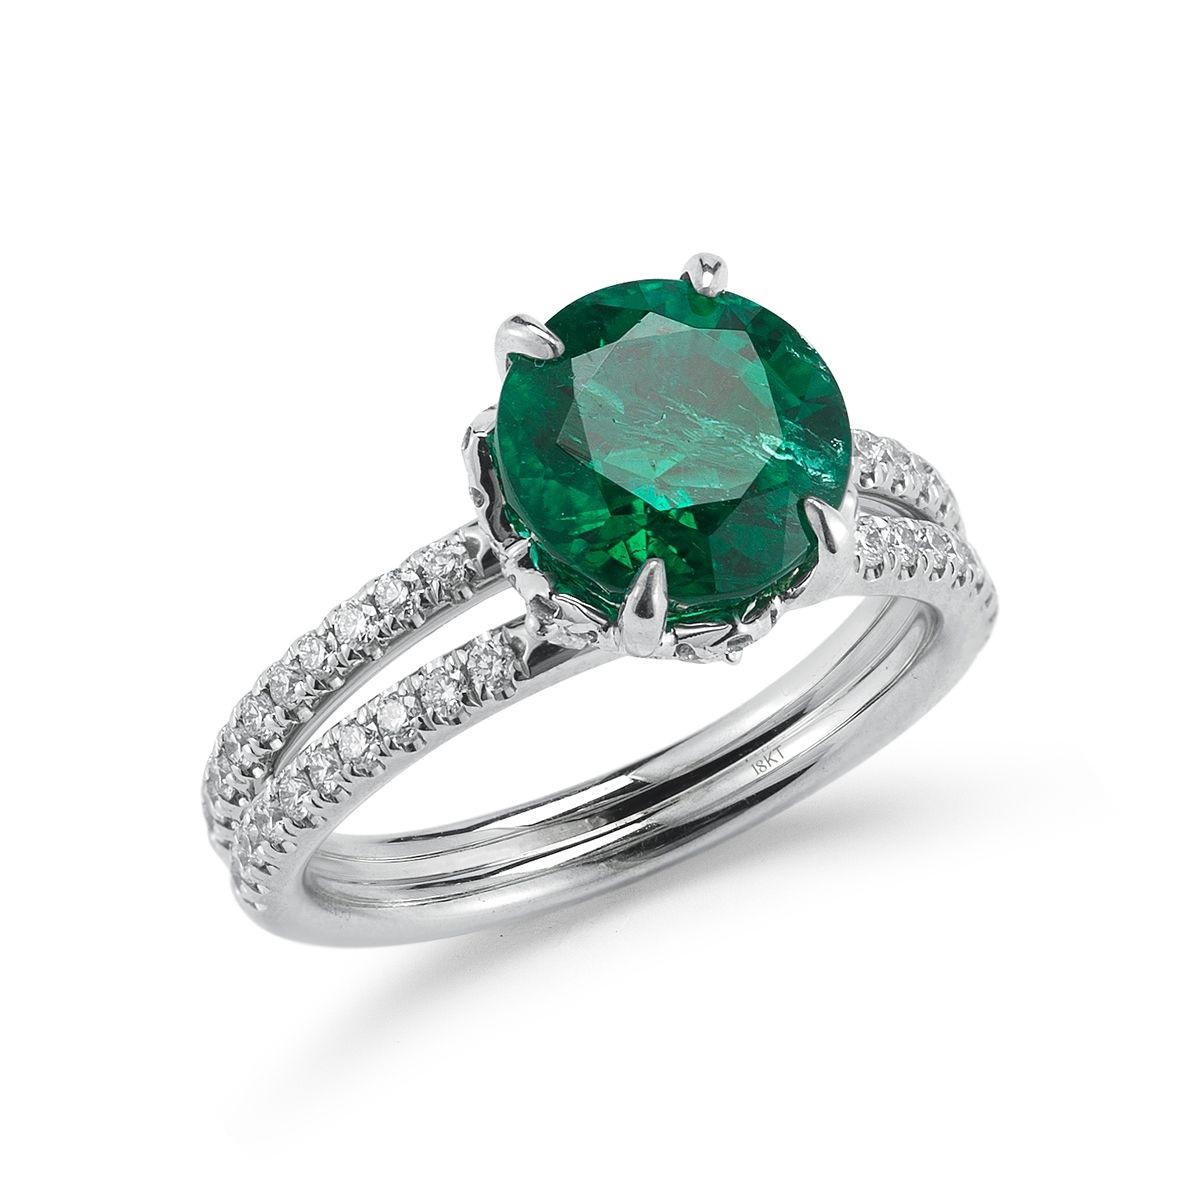 18k White Gold 2.92ct Emerald And .88ct Diamond Ring

A charming round emerald is nestled atop a lofted diamond basket with
a classic split micropavÃ© band.
Item: # 02557
Metal: 18k W
Lab: C.dunaigre
Color Weight: 2.92 ct.
Diamond Weight: 0.88 ct.